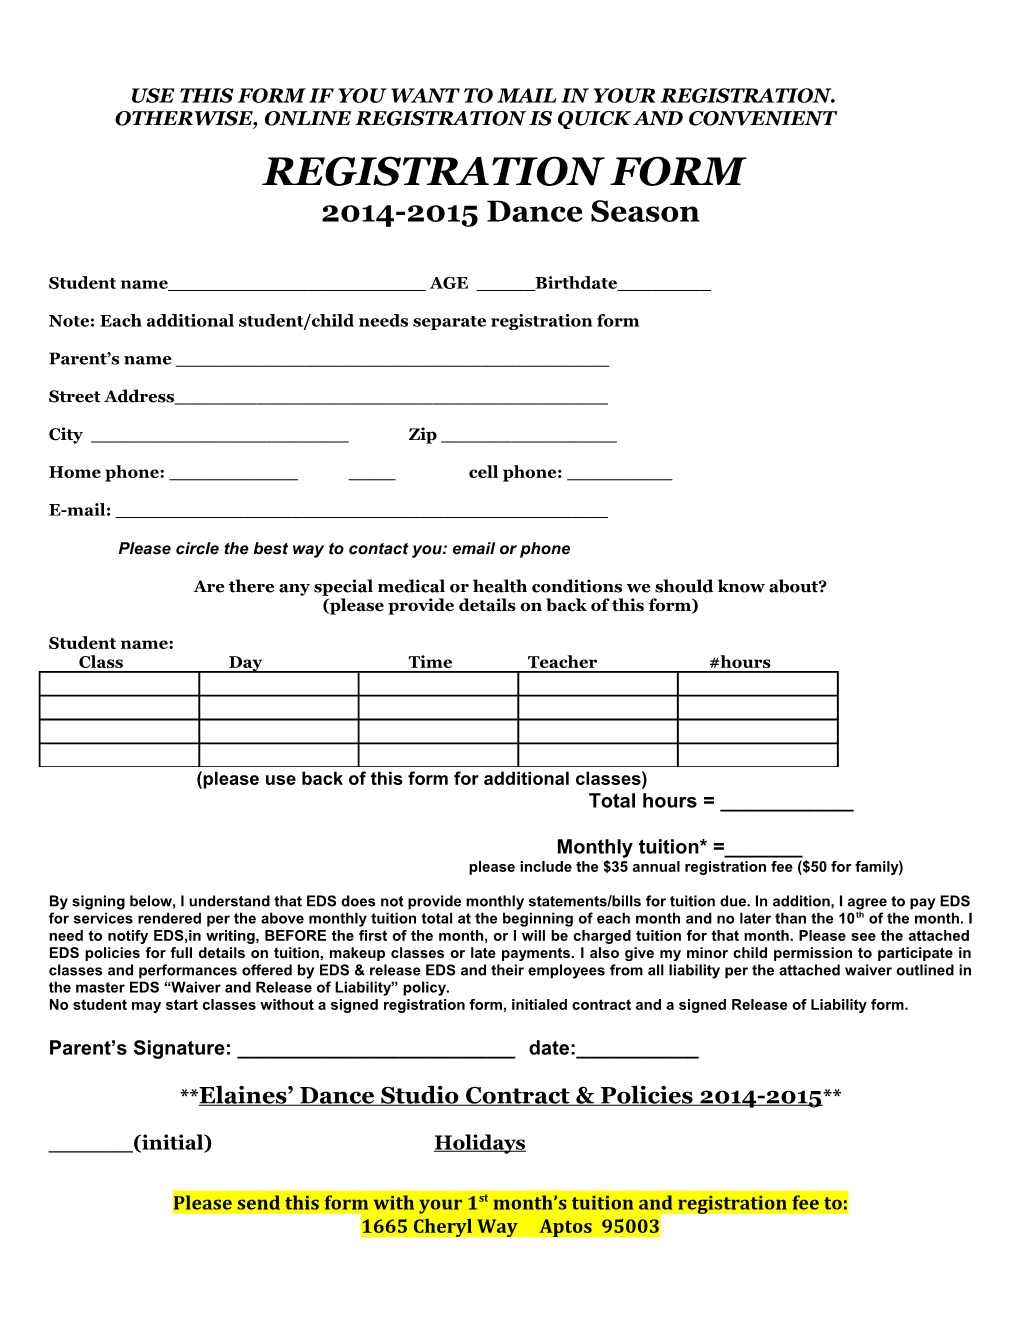 Use This Form If You Want to Mail in Your Registration